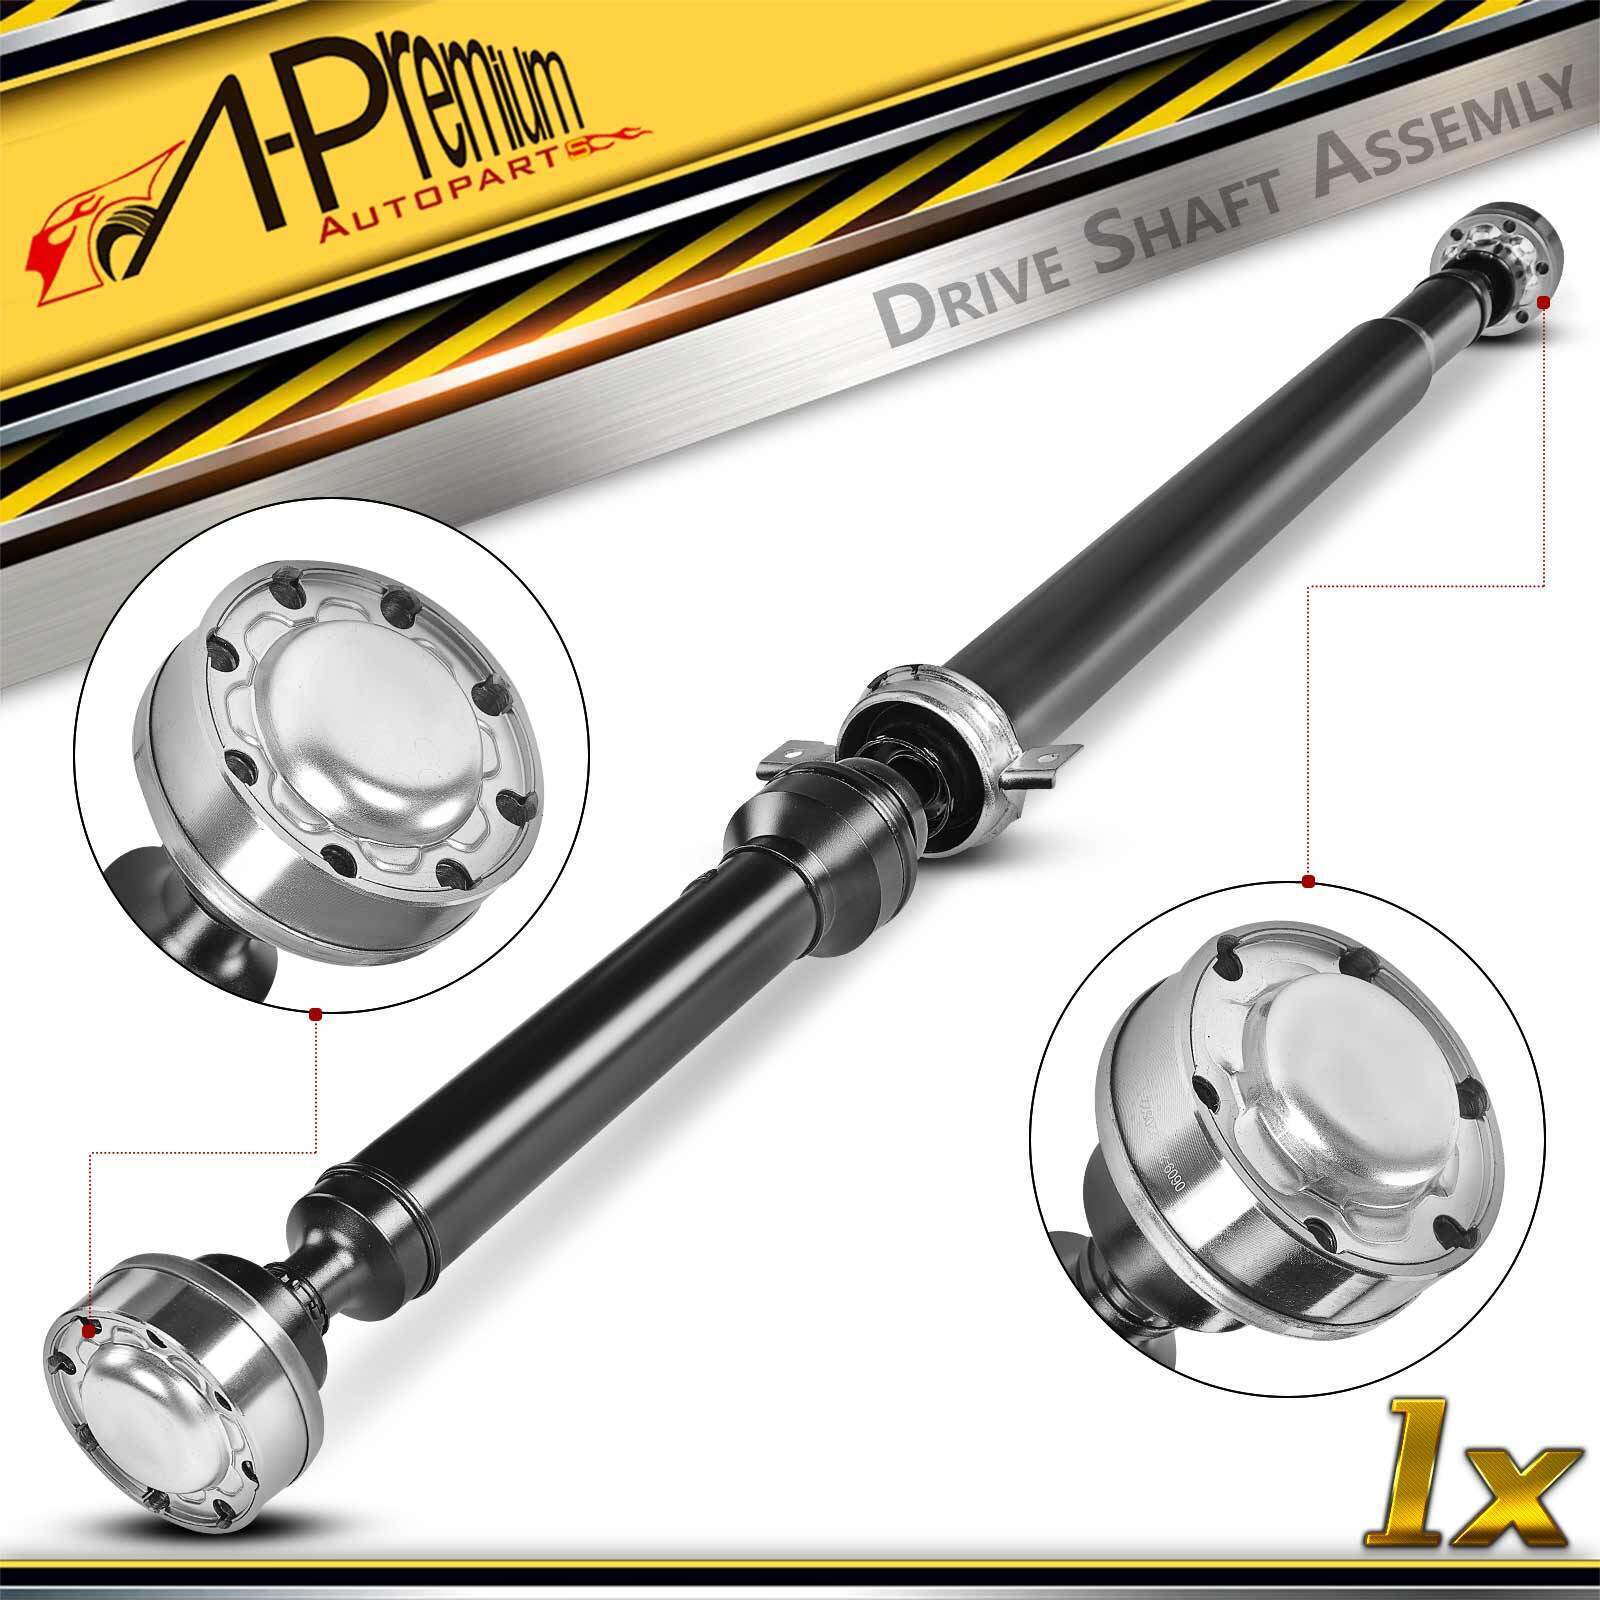 1x Driveshaft Prop Shaft Assembly Rear for Jeep Grand Cherokee 14-19 V6 3.6L RWD